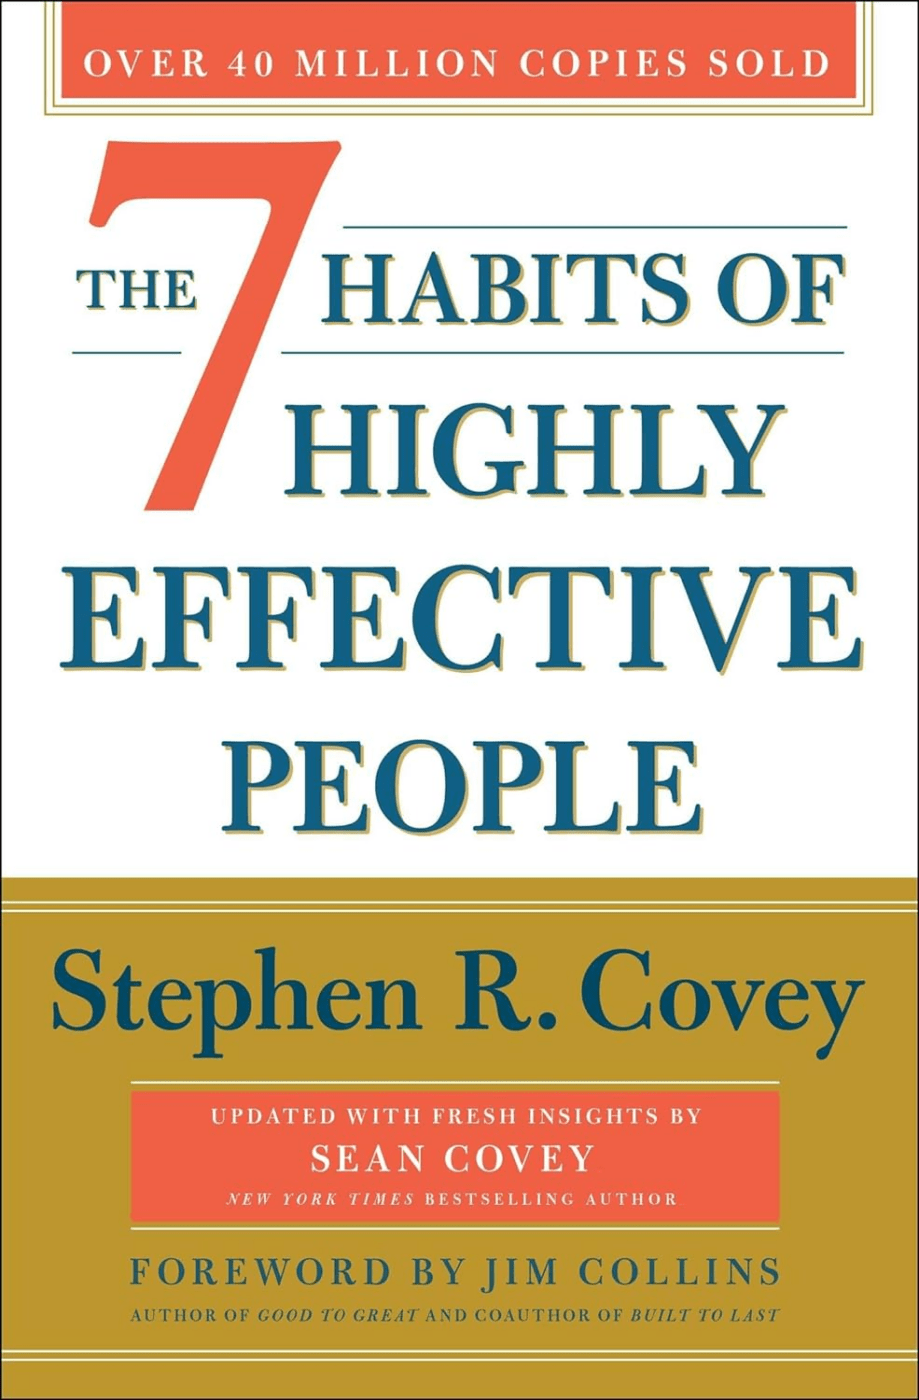 2. The 7 Habits of Highly Effective People by Stephen R. Covey 